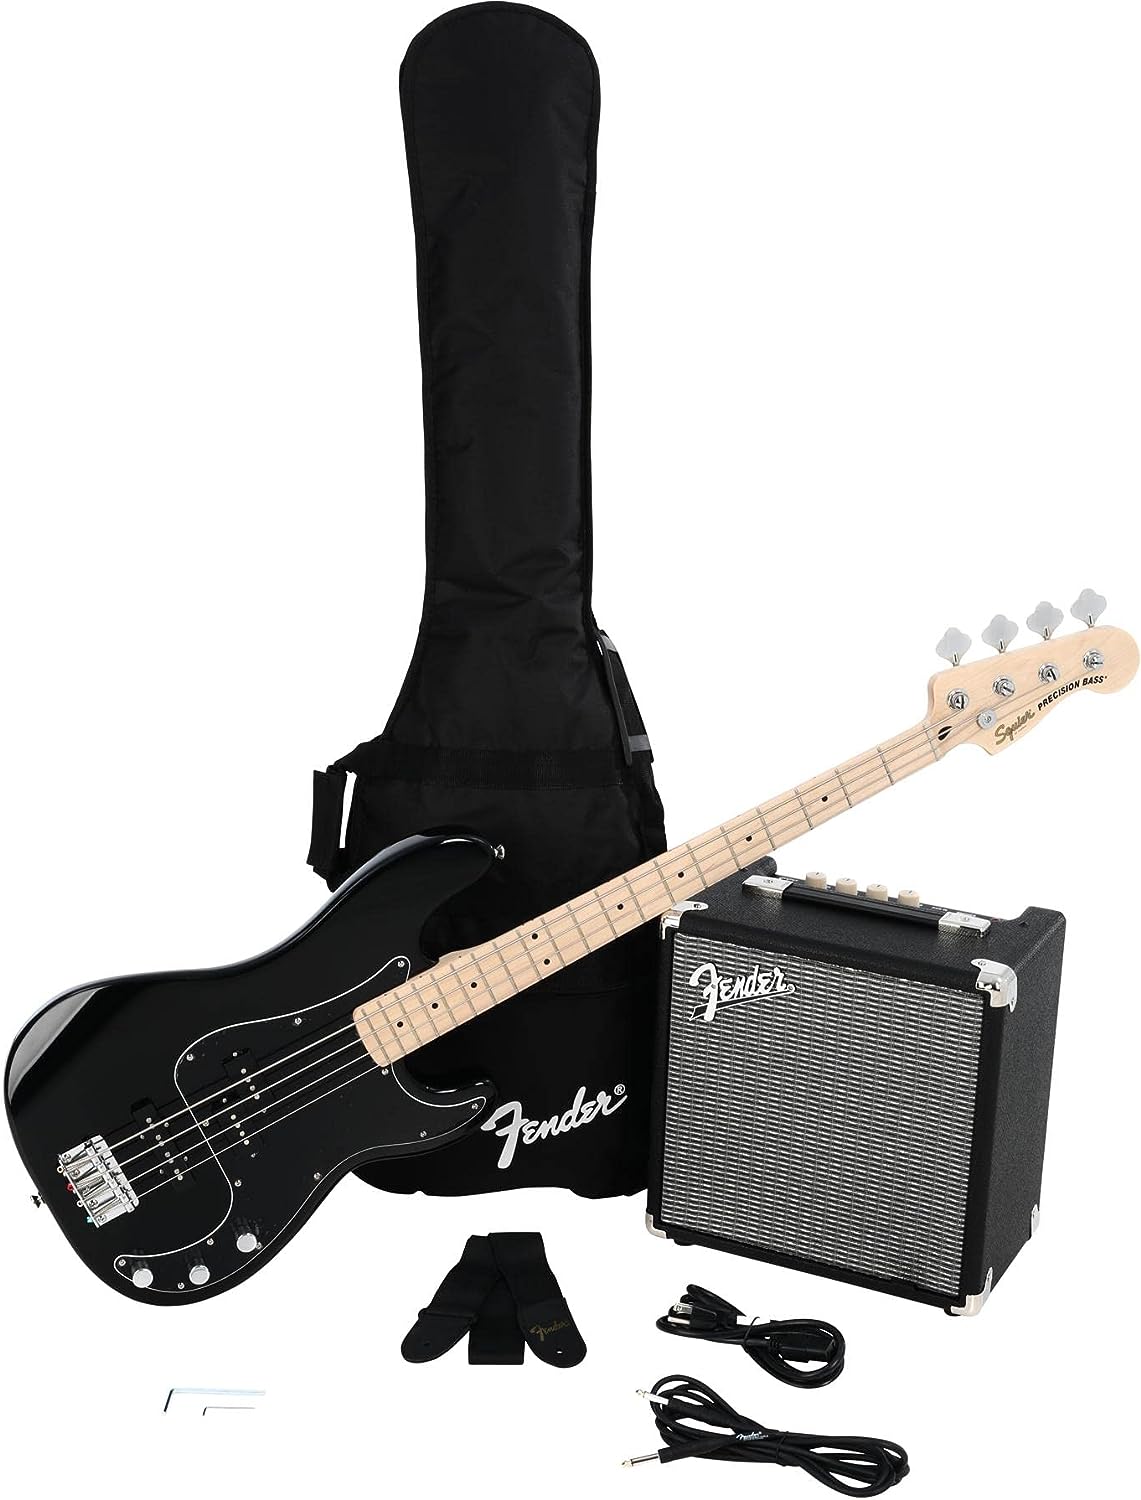 Squier by Fender Precision Bass Guitar Kit on a white background